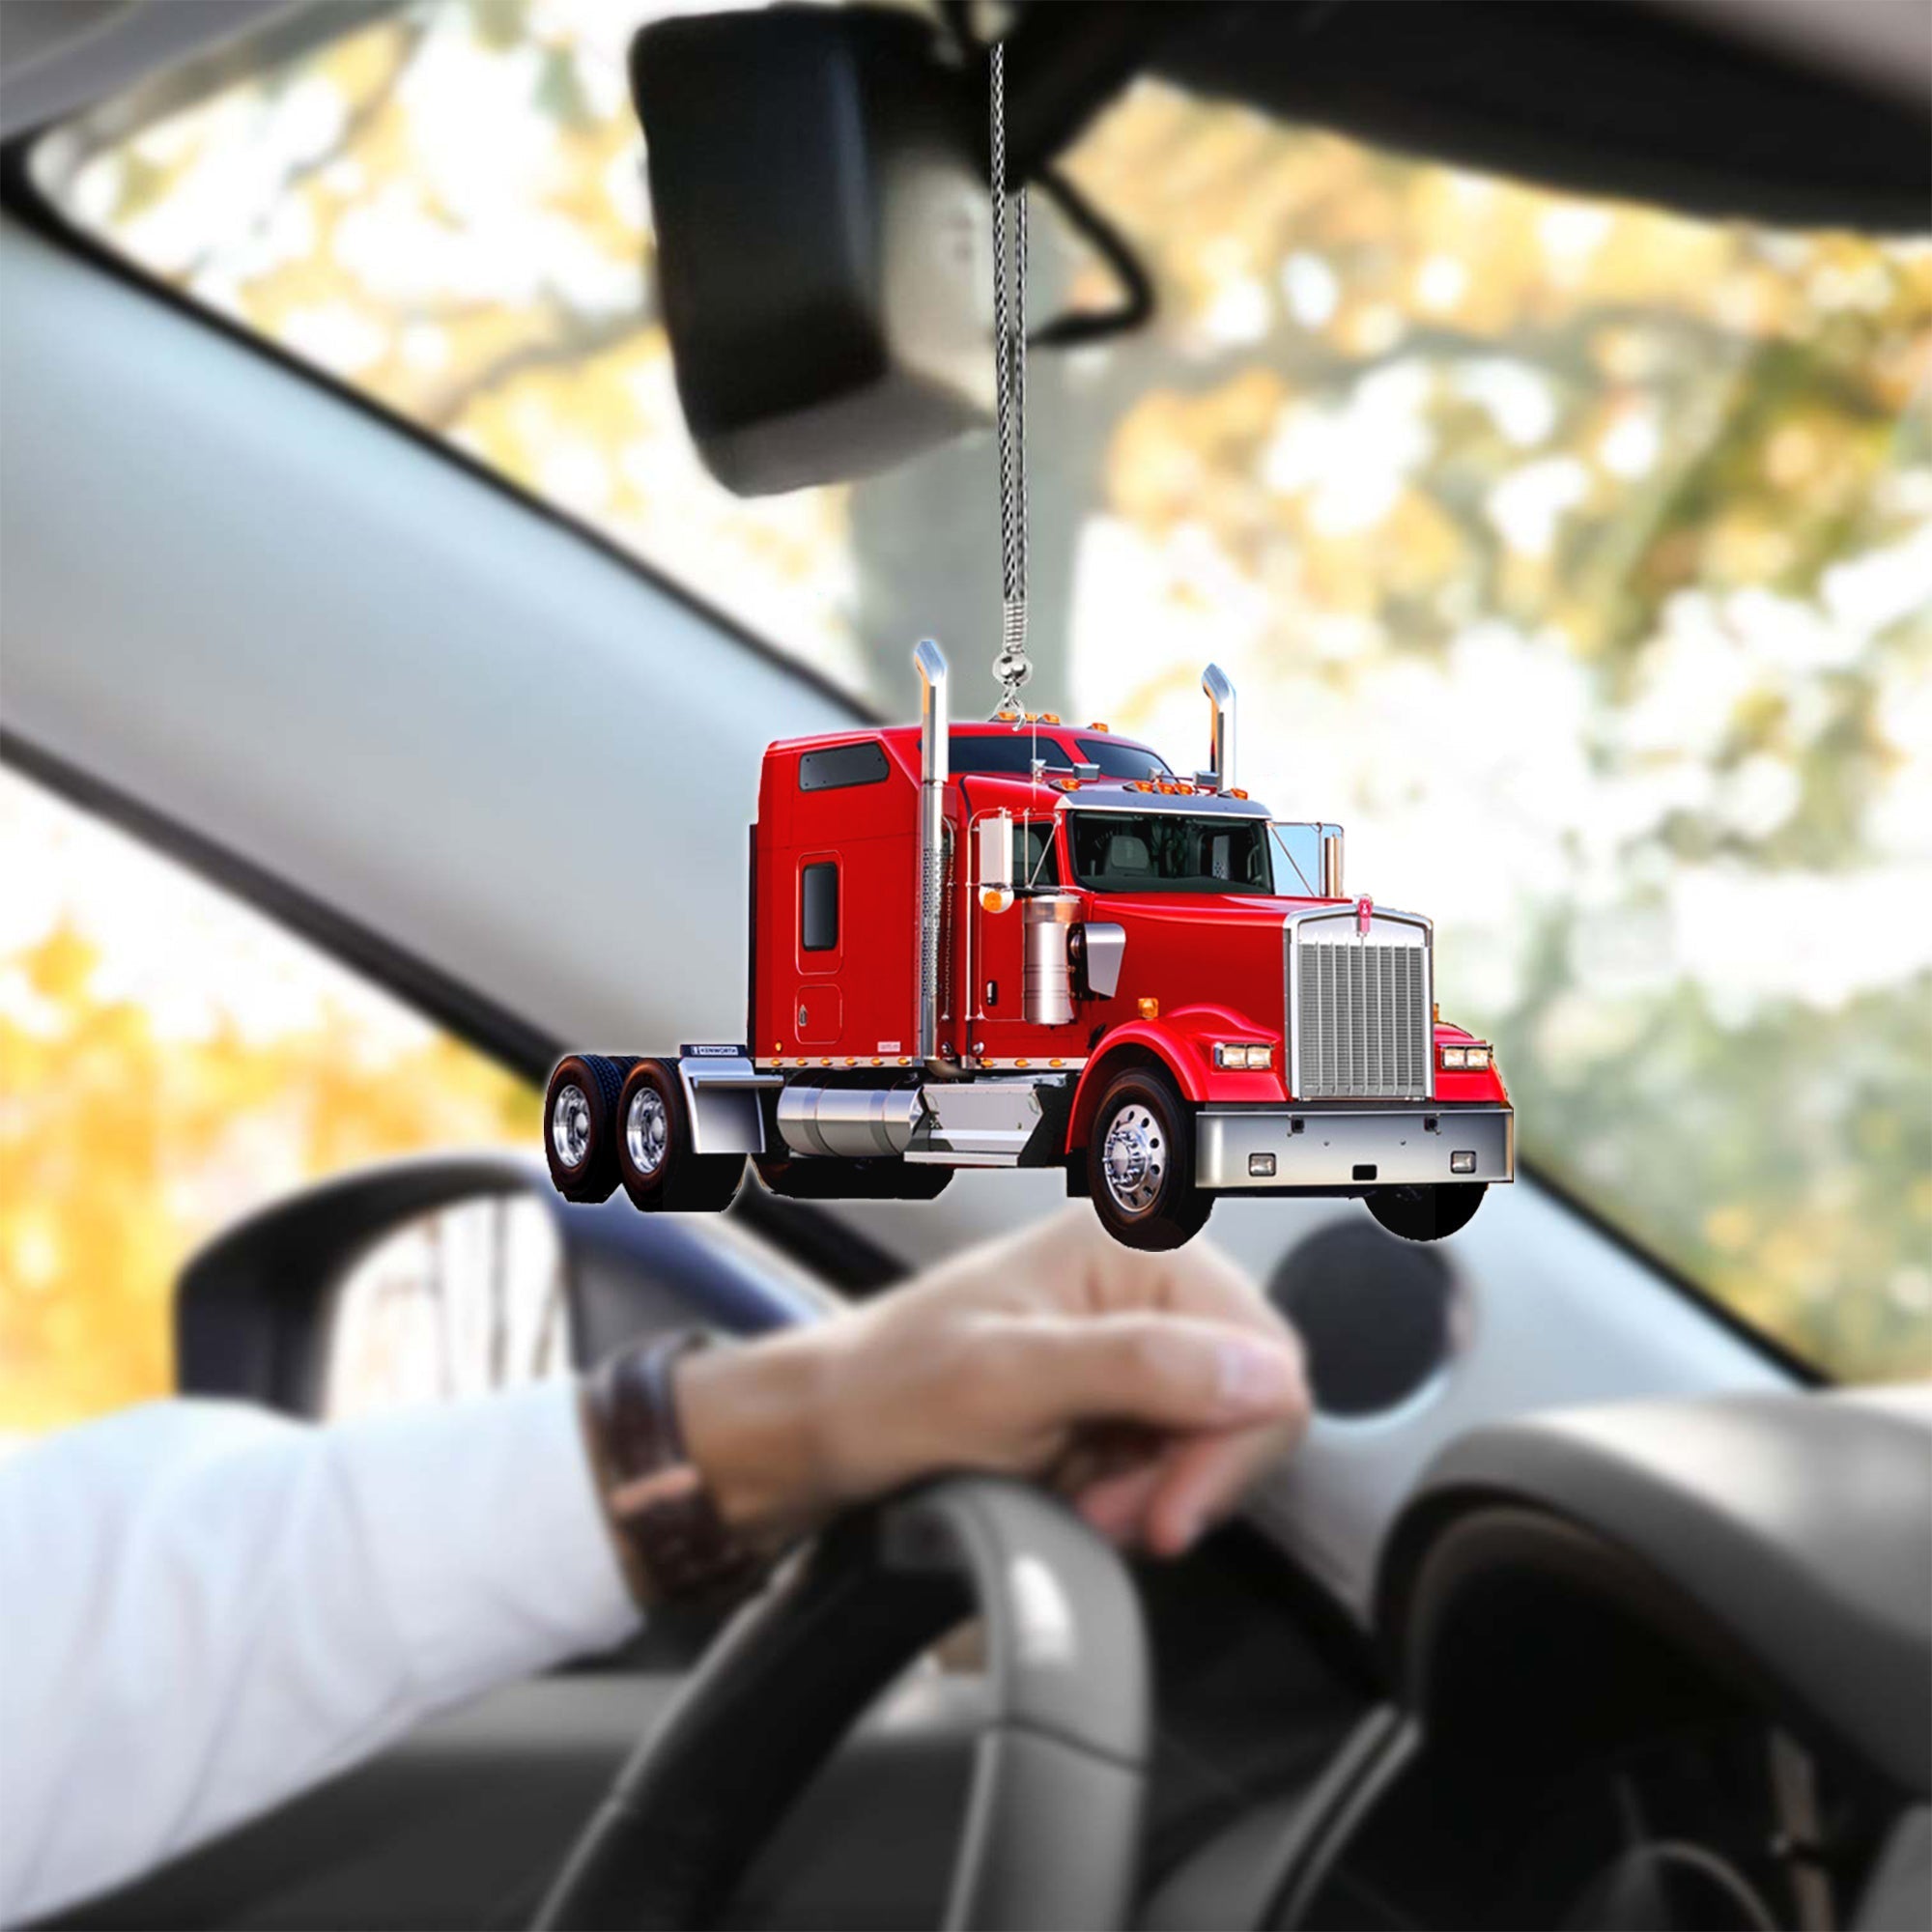 Coolspod Red Truck Car Hanging Ornament Decoration For Truck Lovers